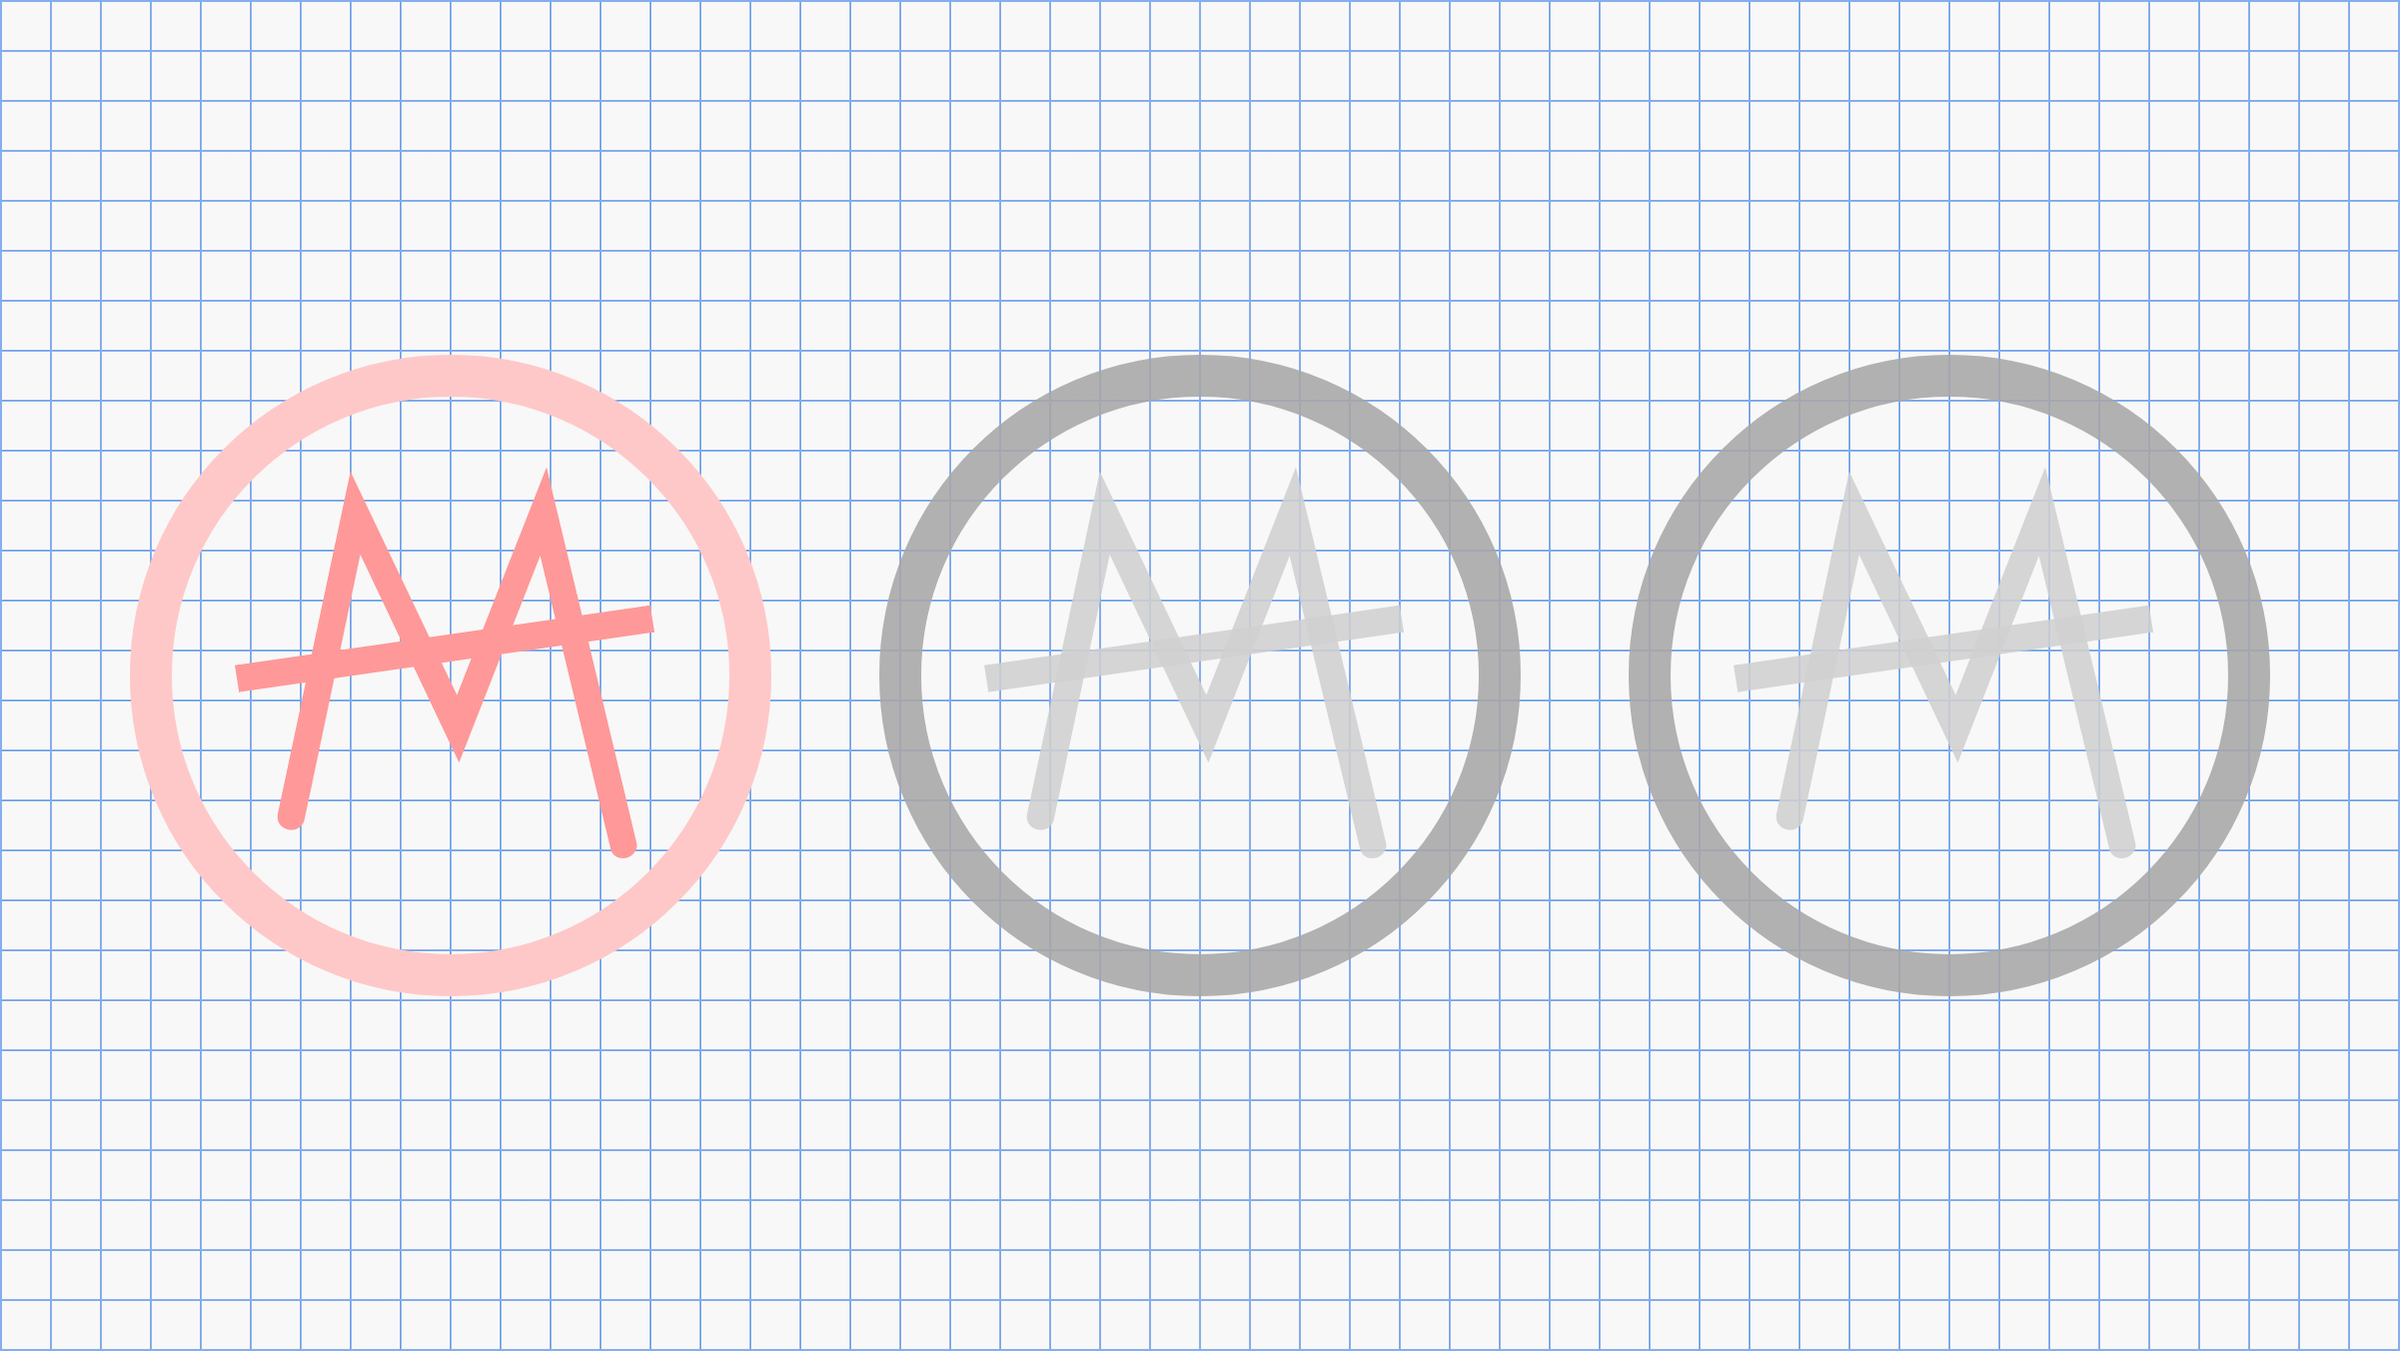 Prototypes for Aaron's logo, which looks like the letter M with a horizontal line through it.